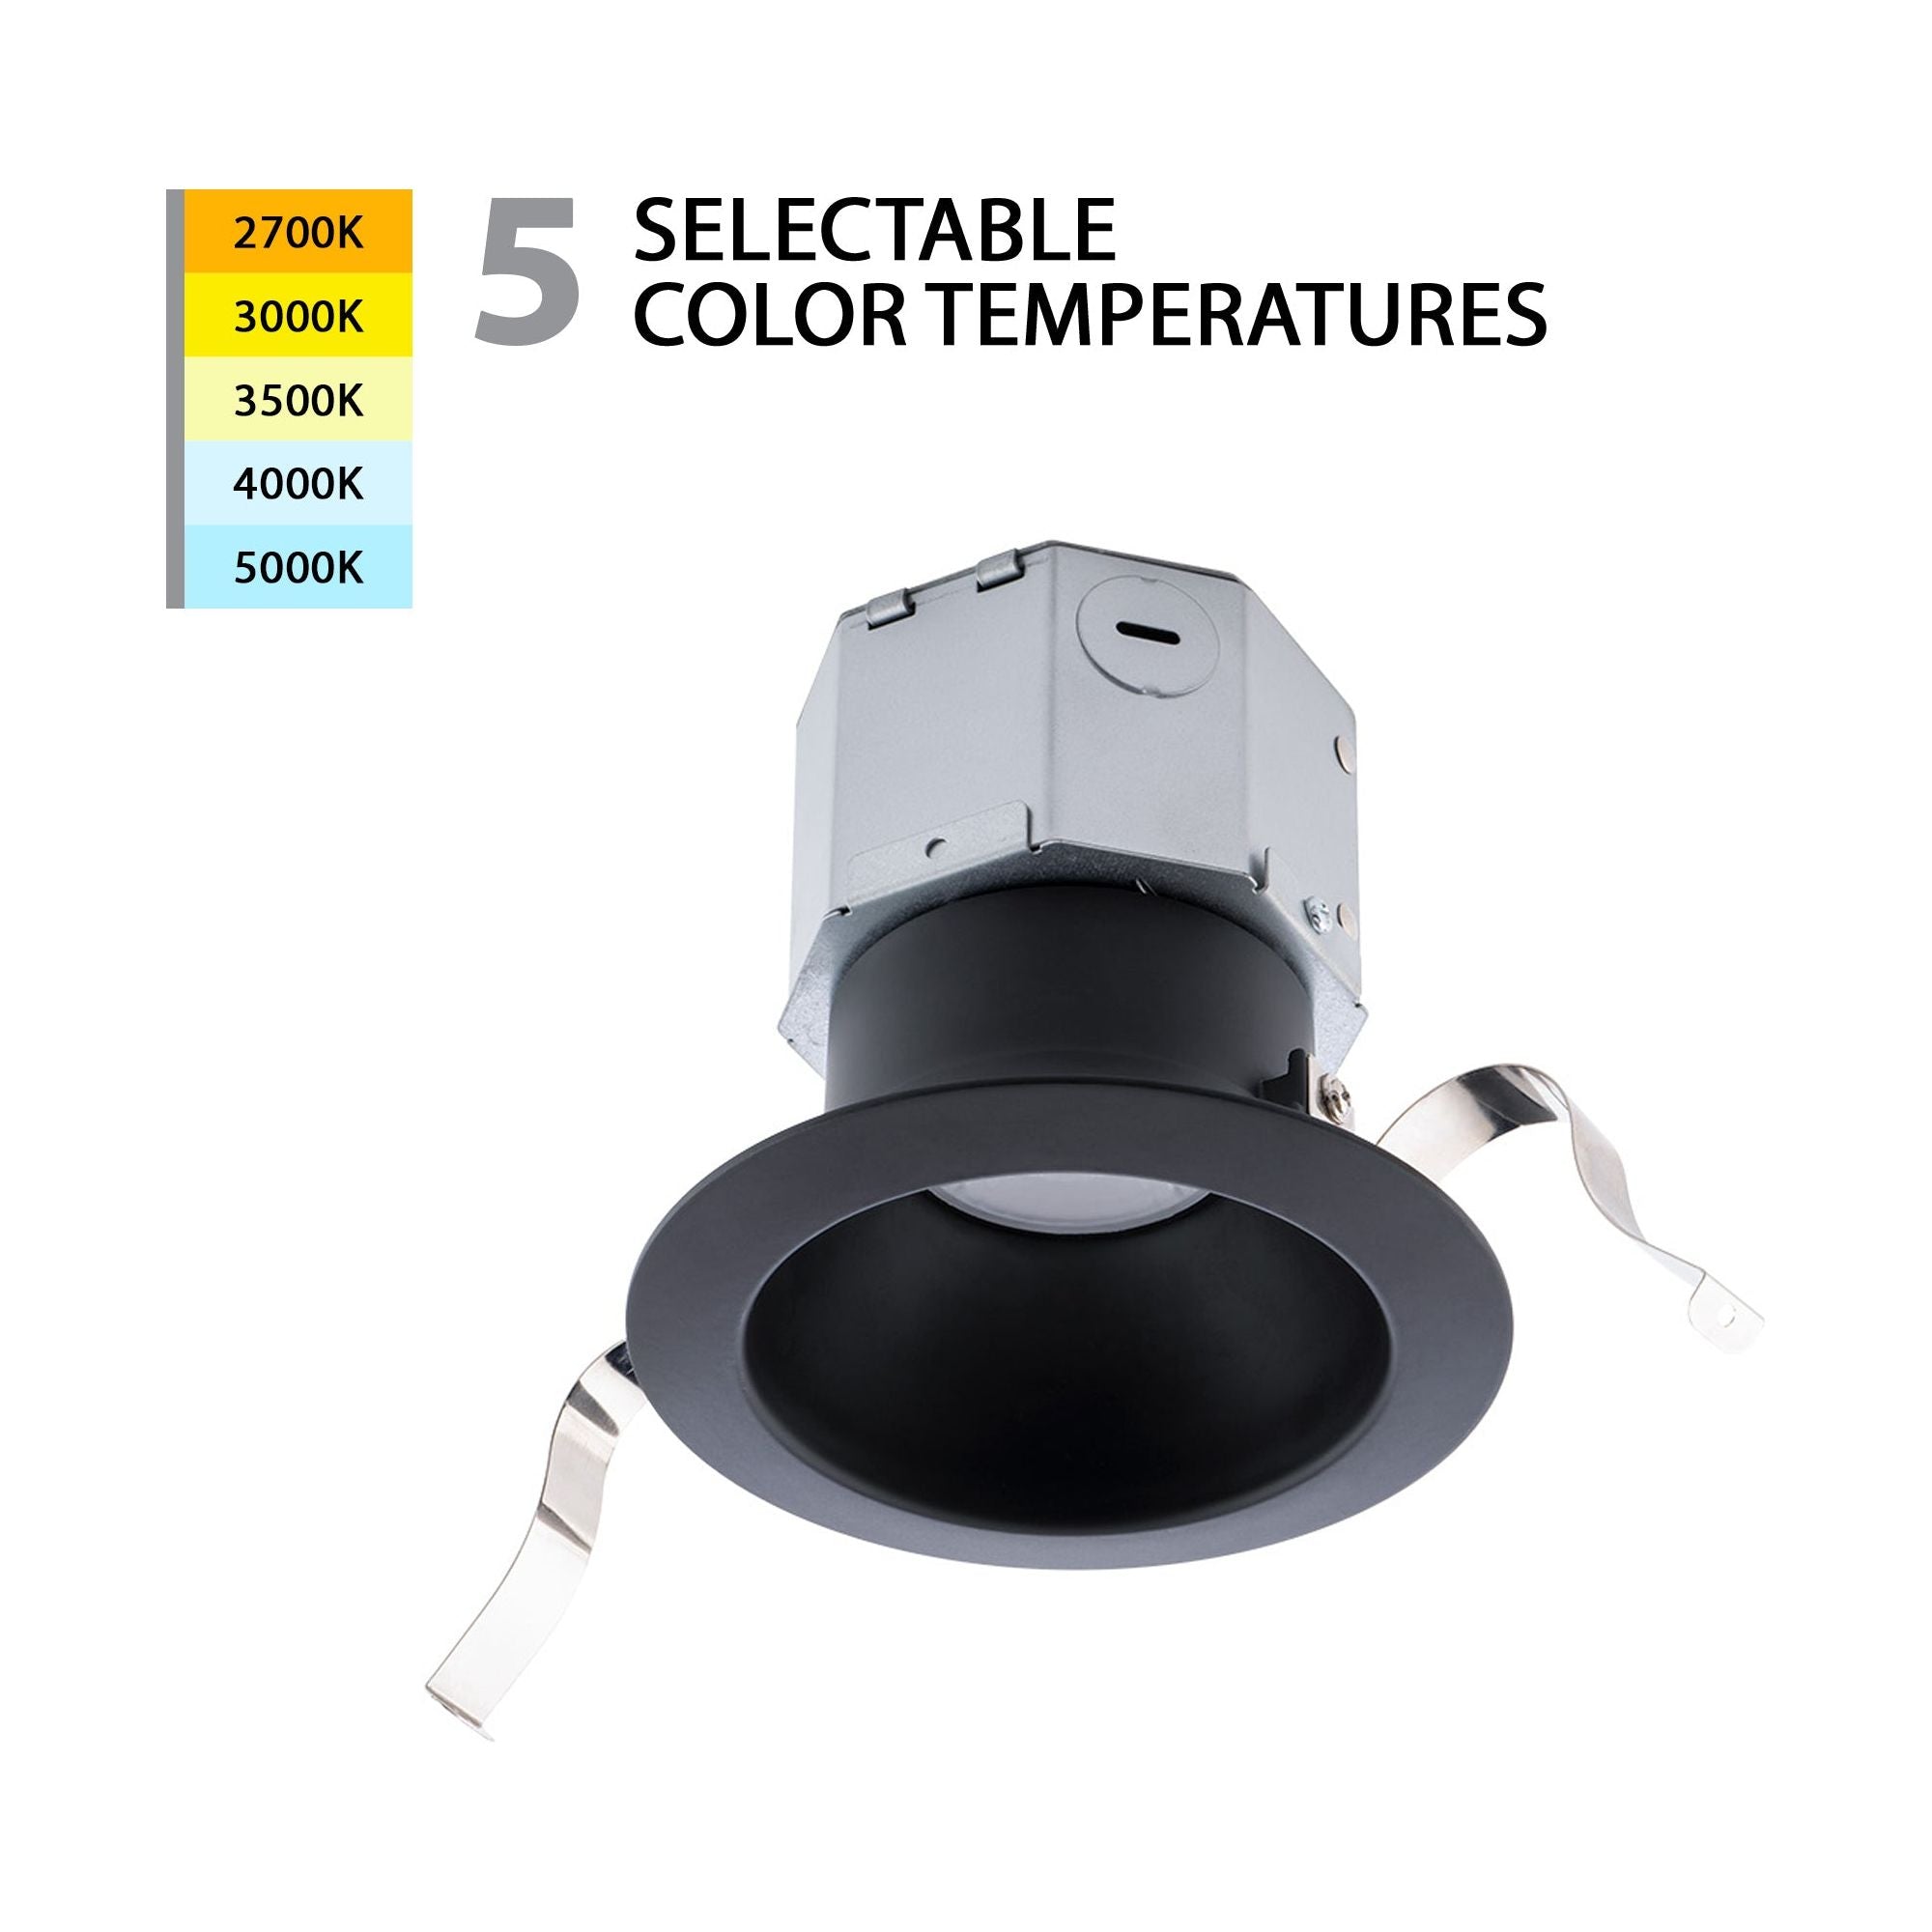 Pop-in 4" LED 5-CCT Round Remodel Recessed Kit